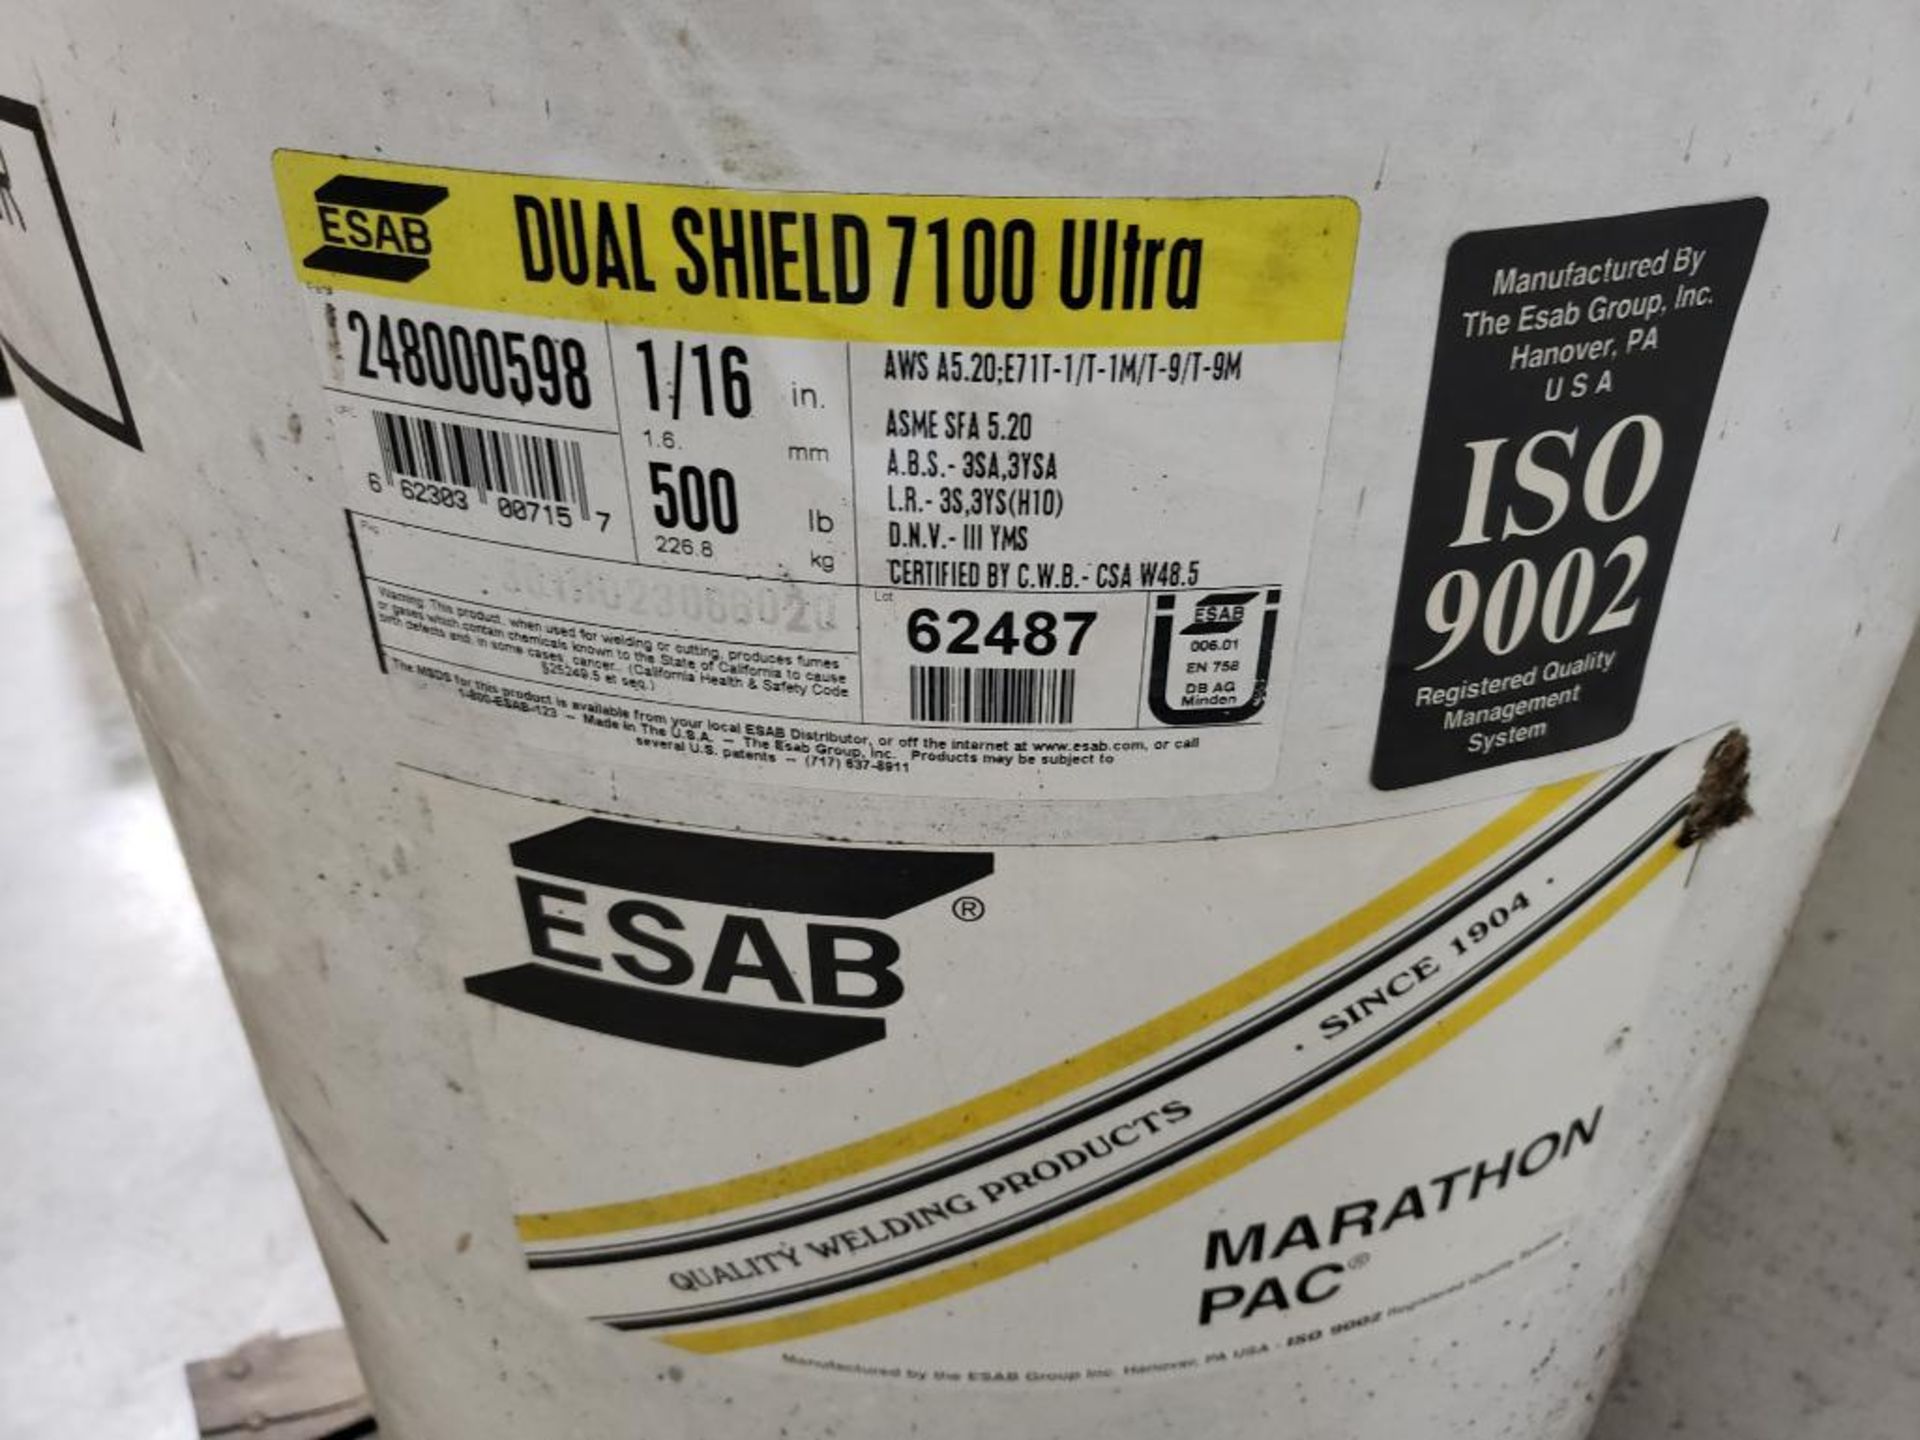 500lbs Esab dual shield 7100 Ultra welding wire. 1/16in. Part number 248000598. - Image 2 of 3